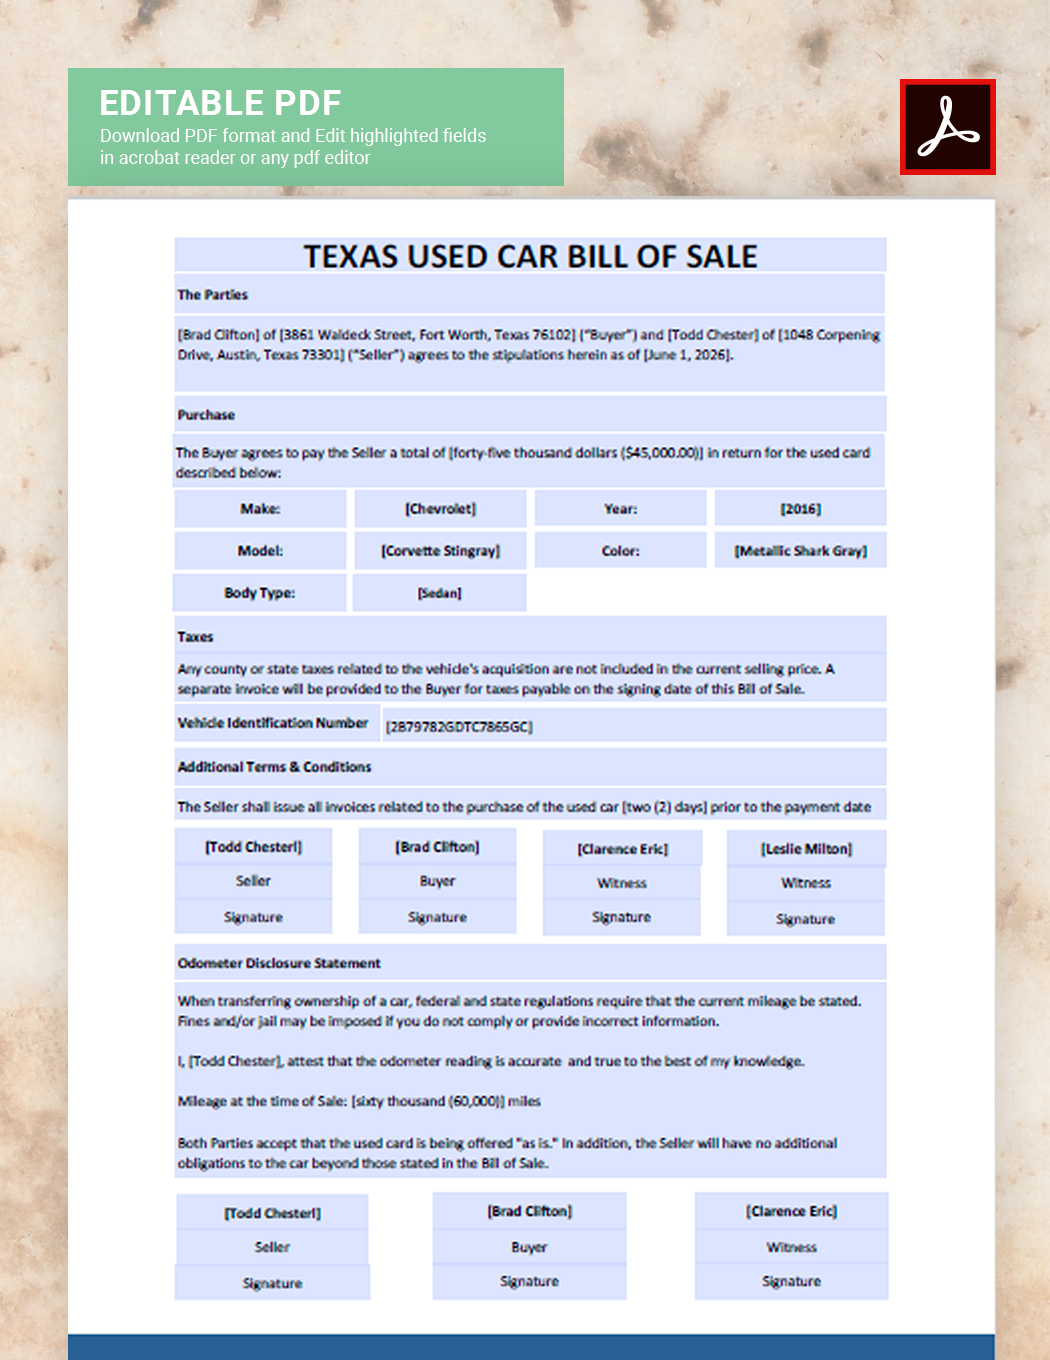 Texas Used Car Bill of Sale Template